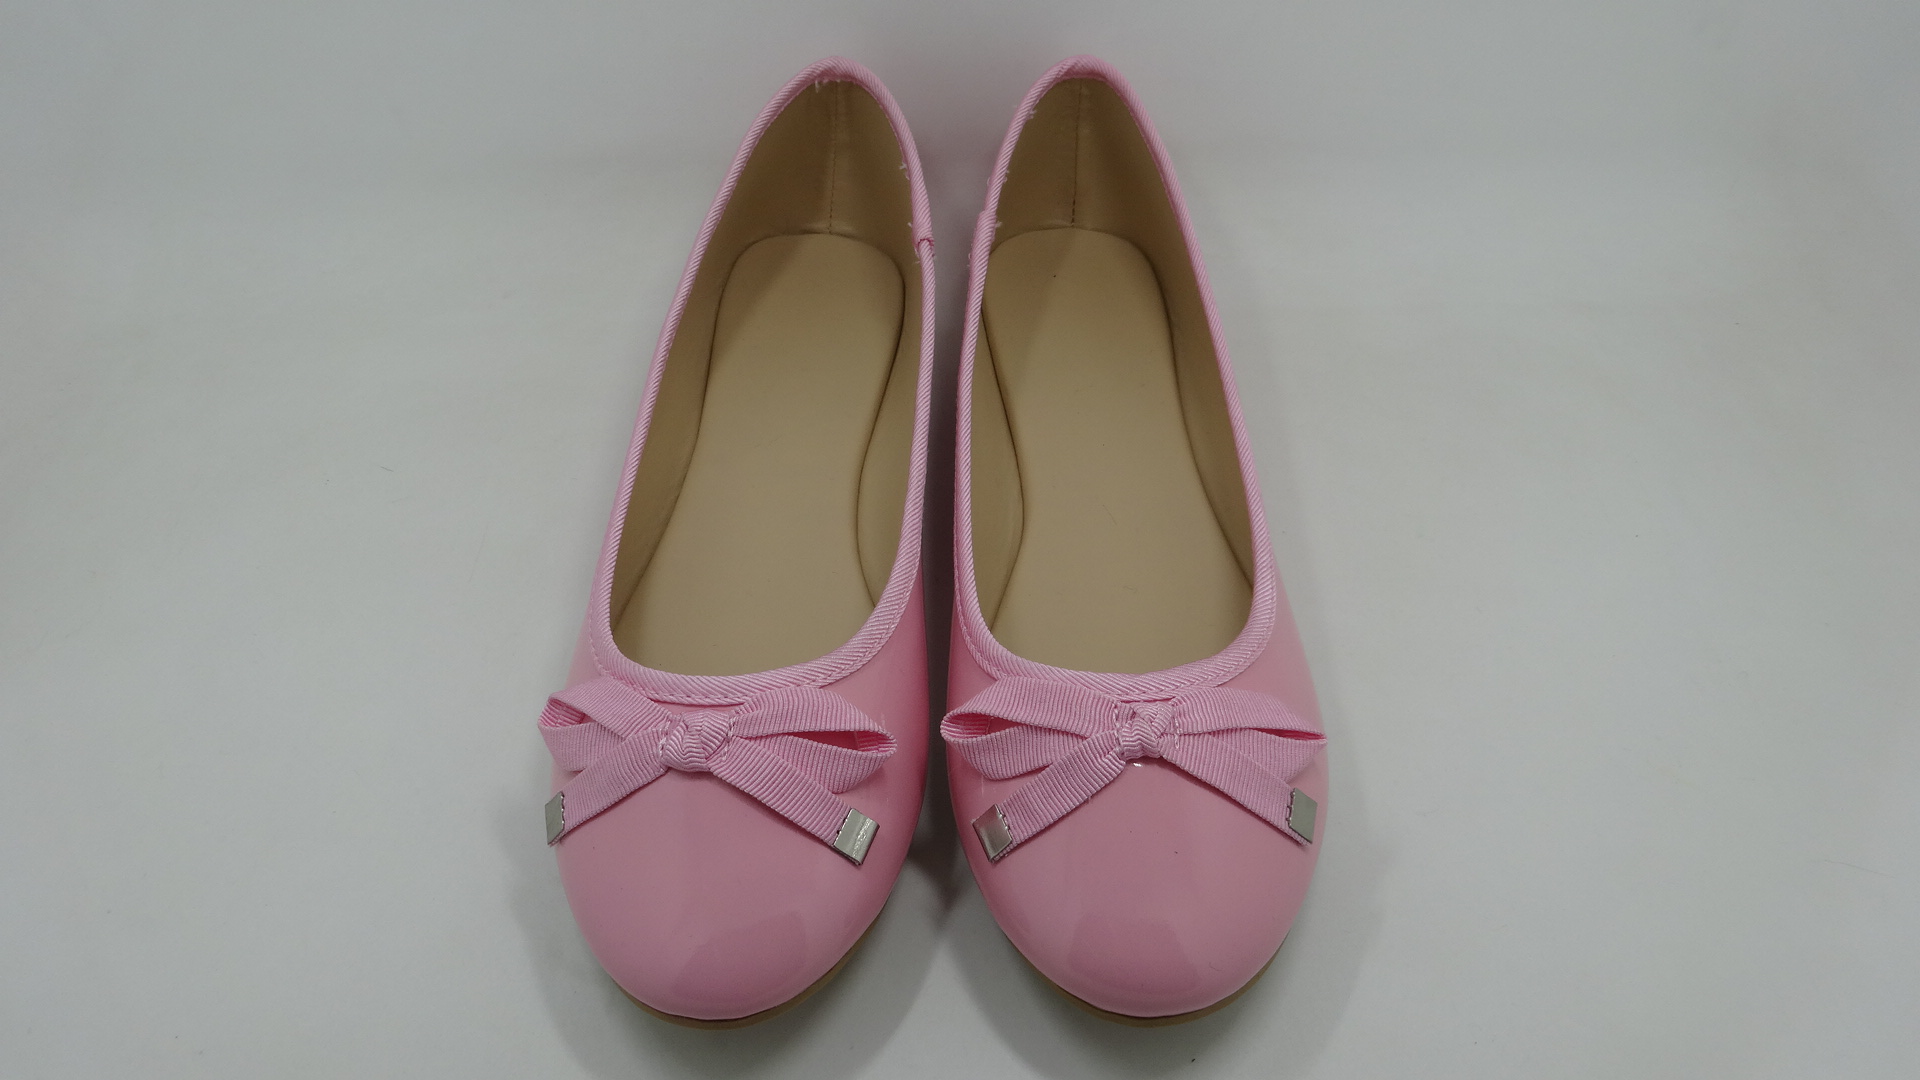 Girls Dress Shoes, Mary Jane Ballet Flats Slip on with Bow for Big Kid 